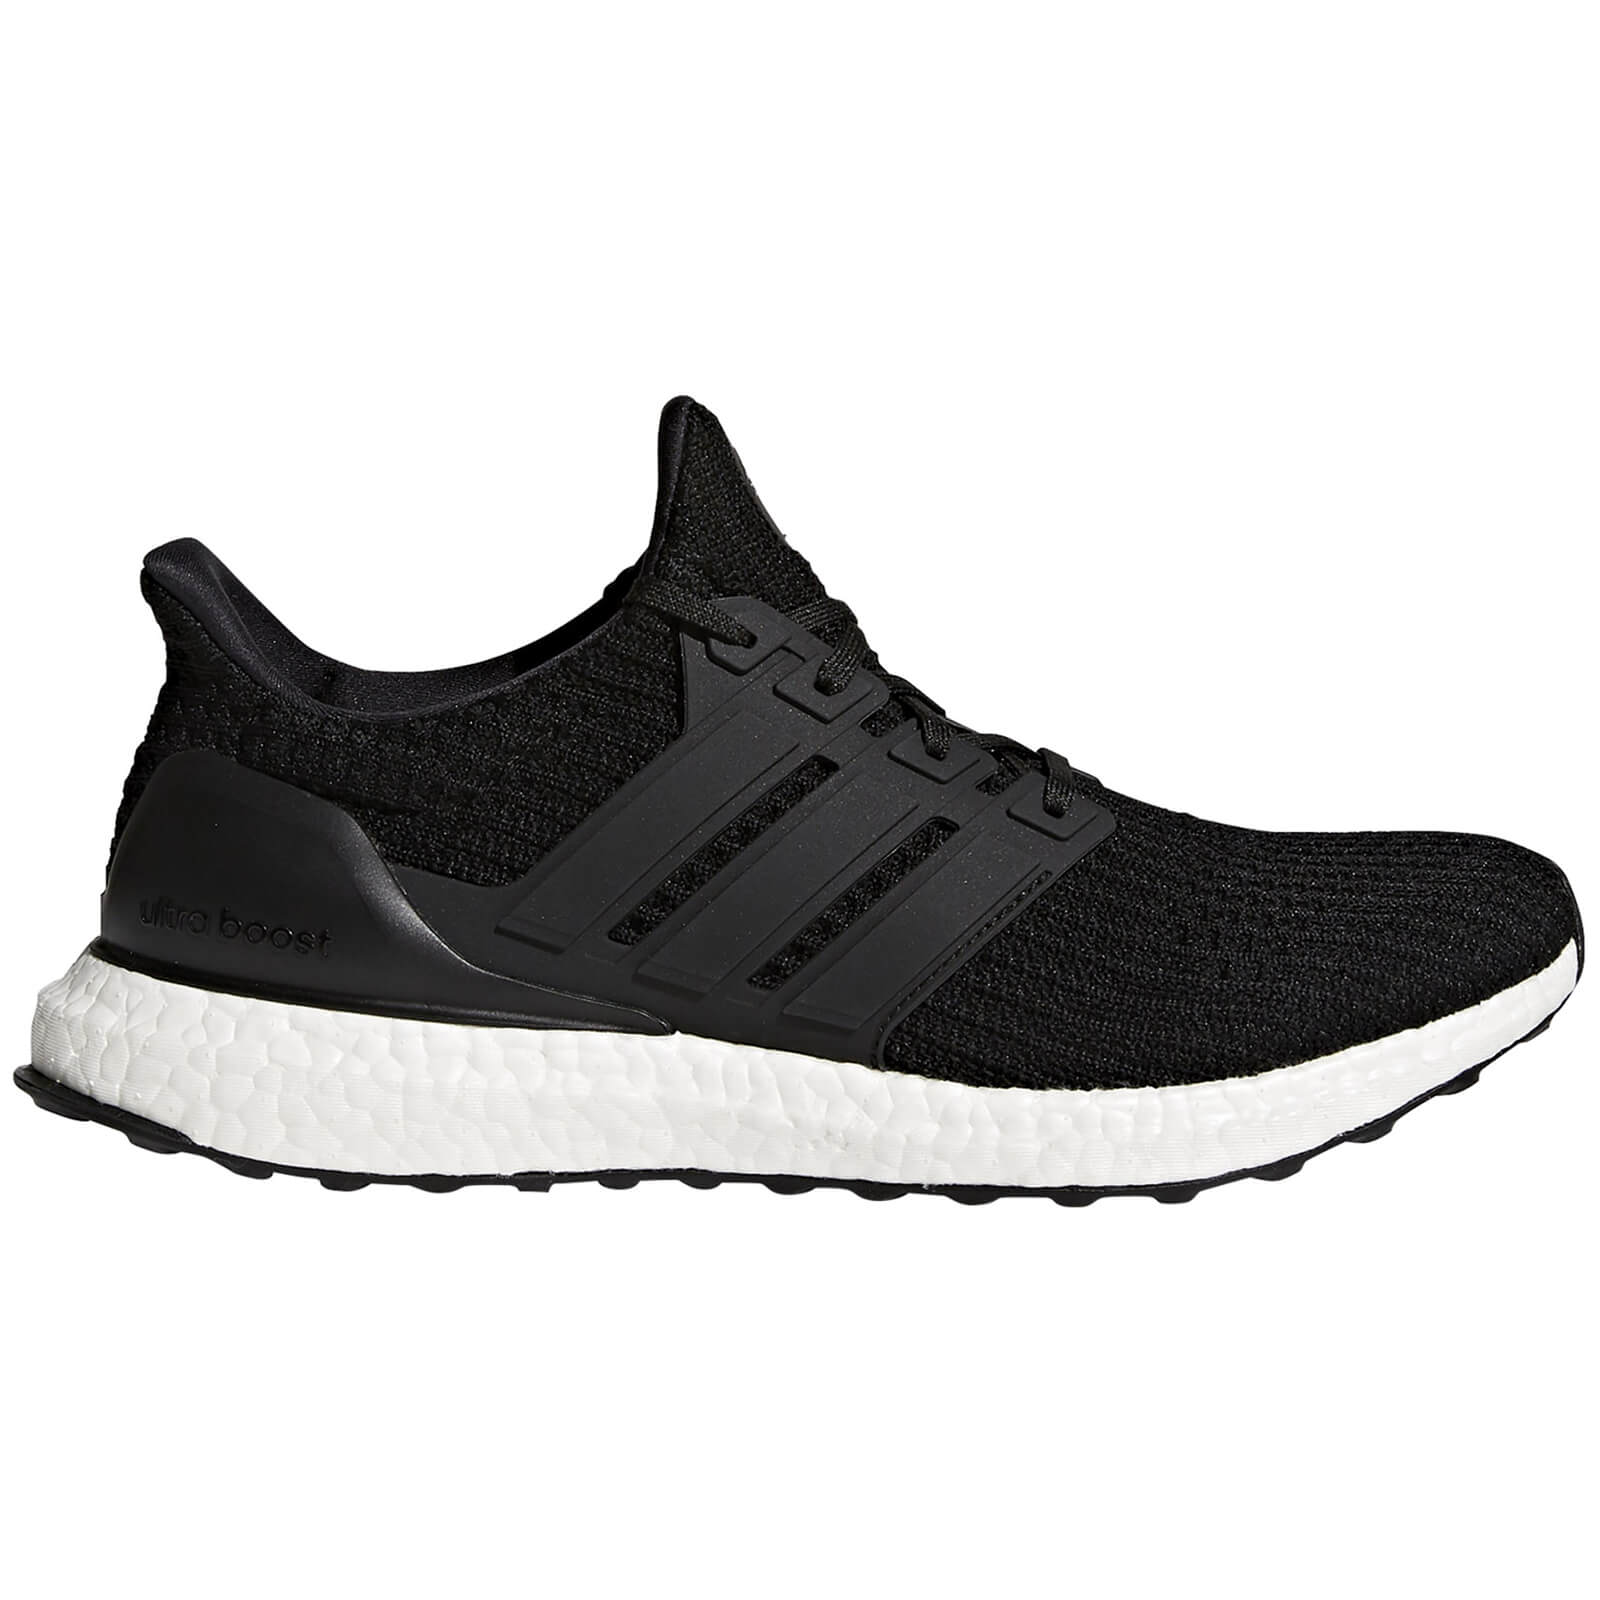 adidas shoes for men ultraboost